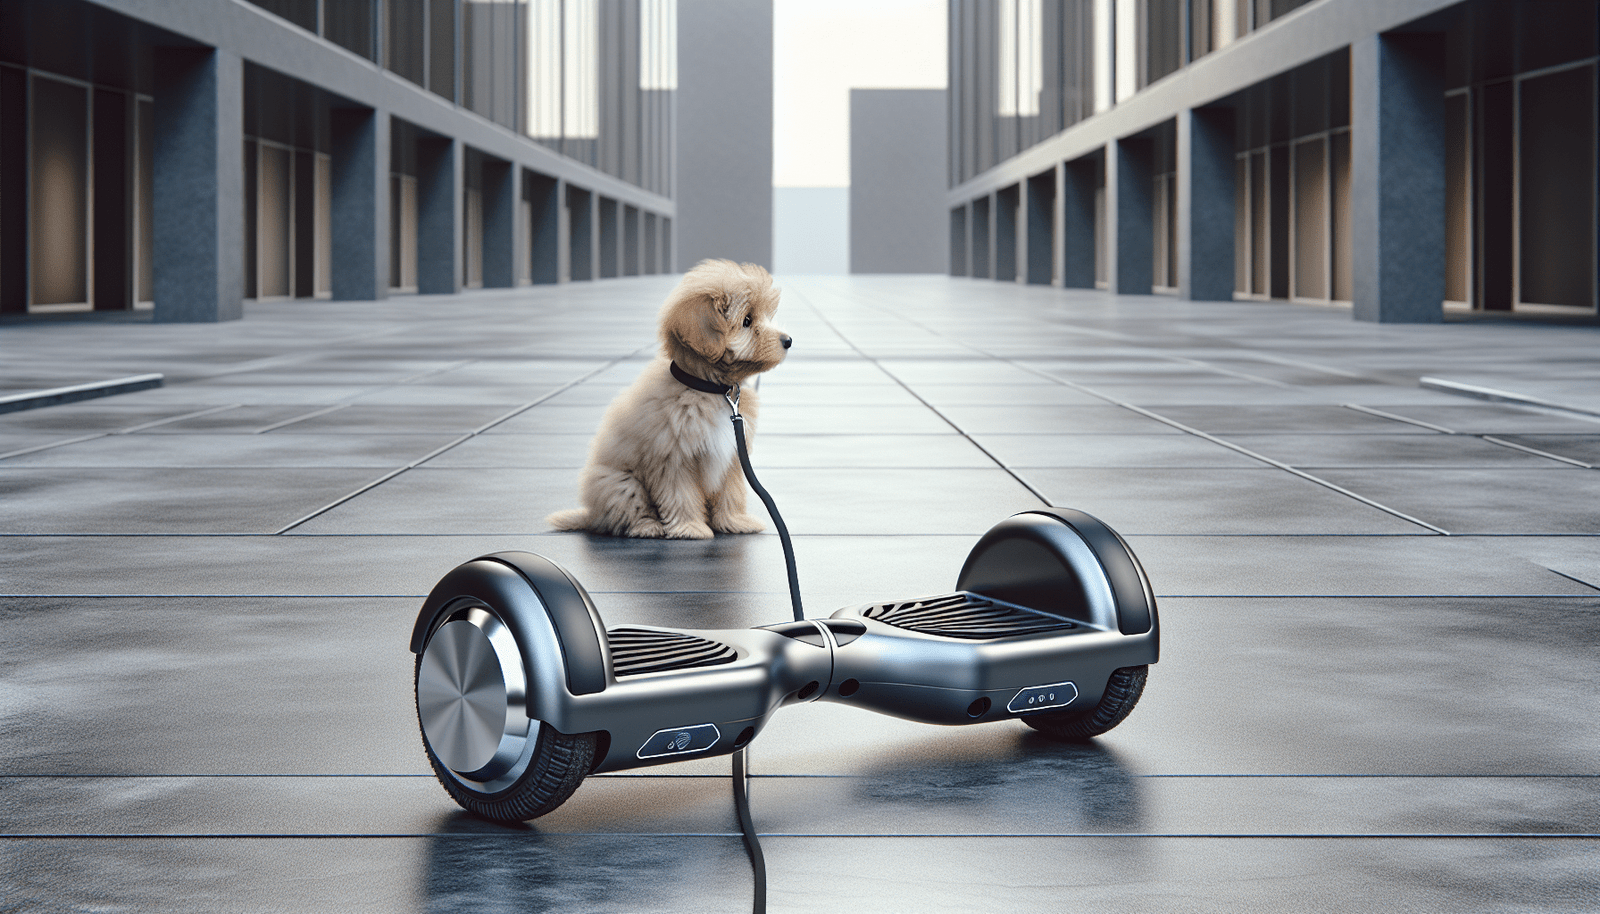 Can I Ride A Hoverboard With A Pet On A Leash?